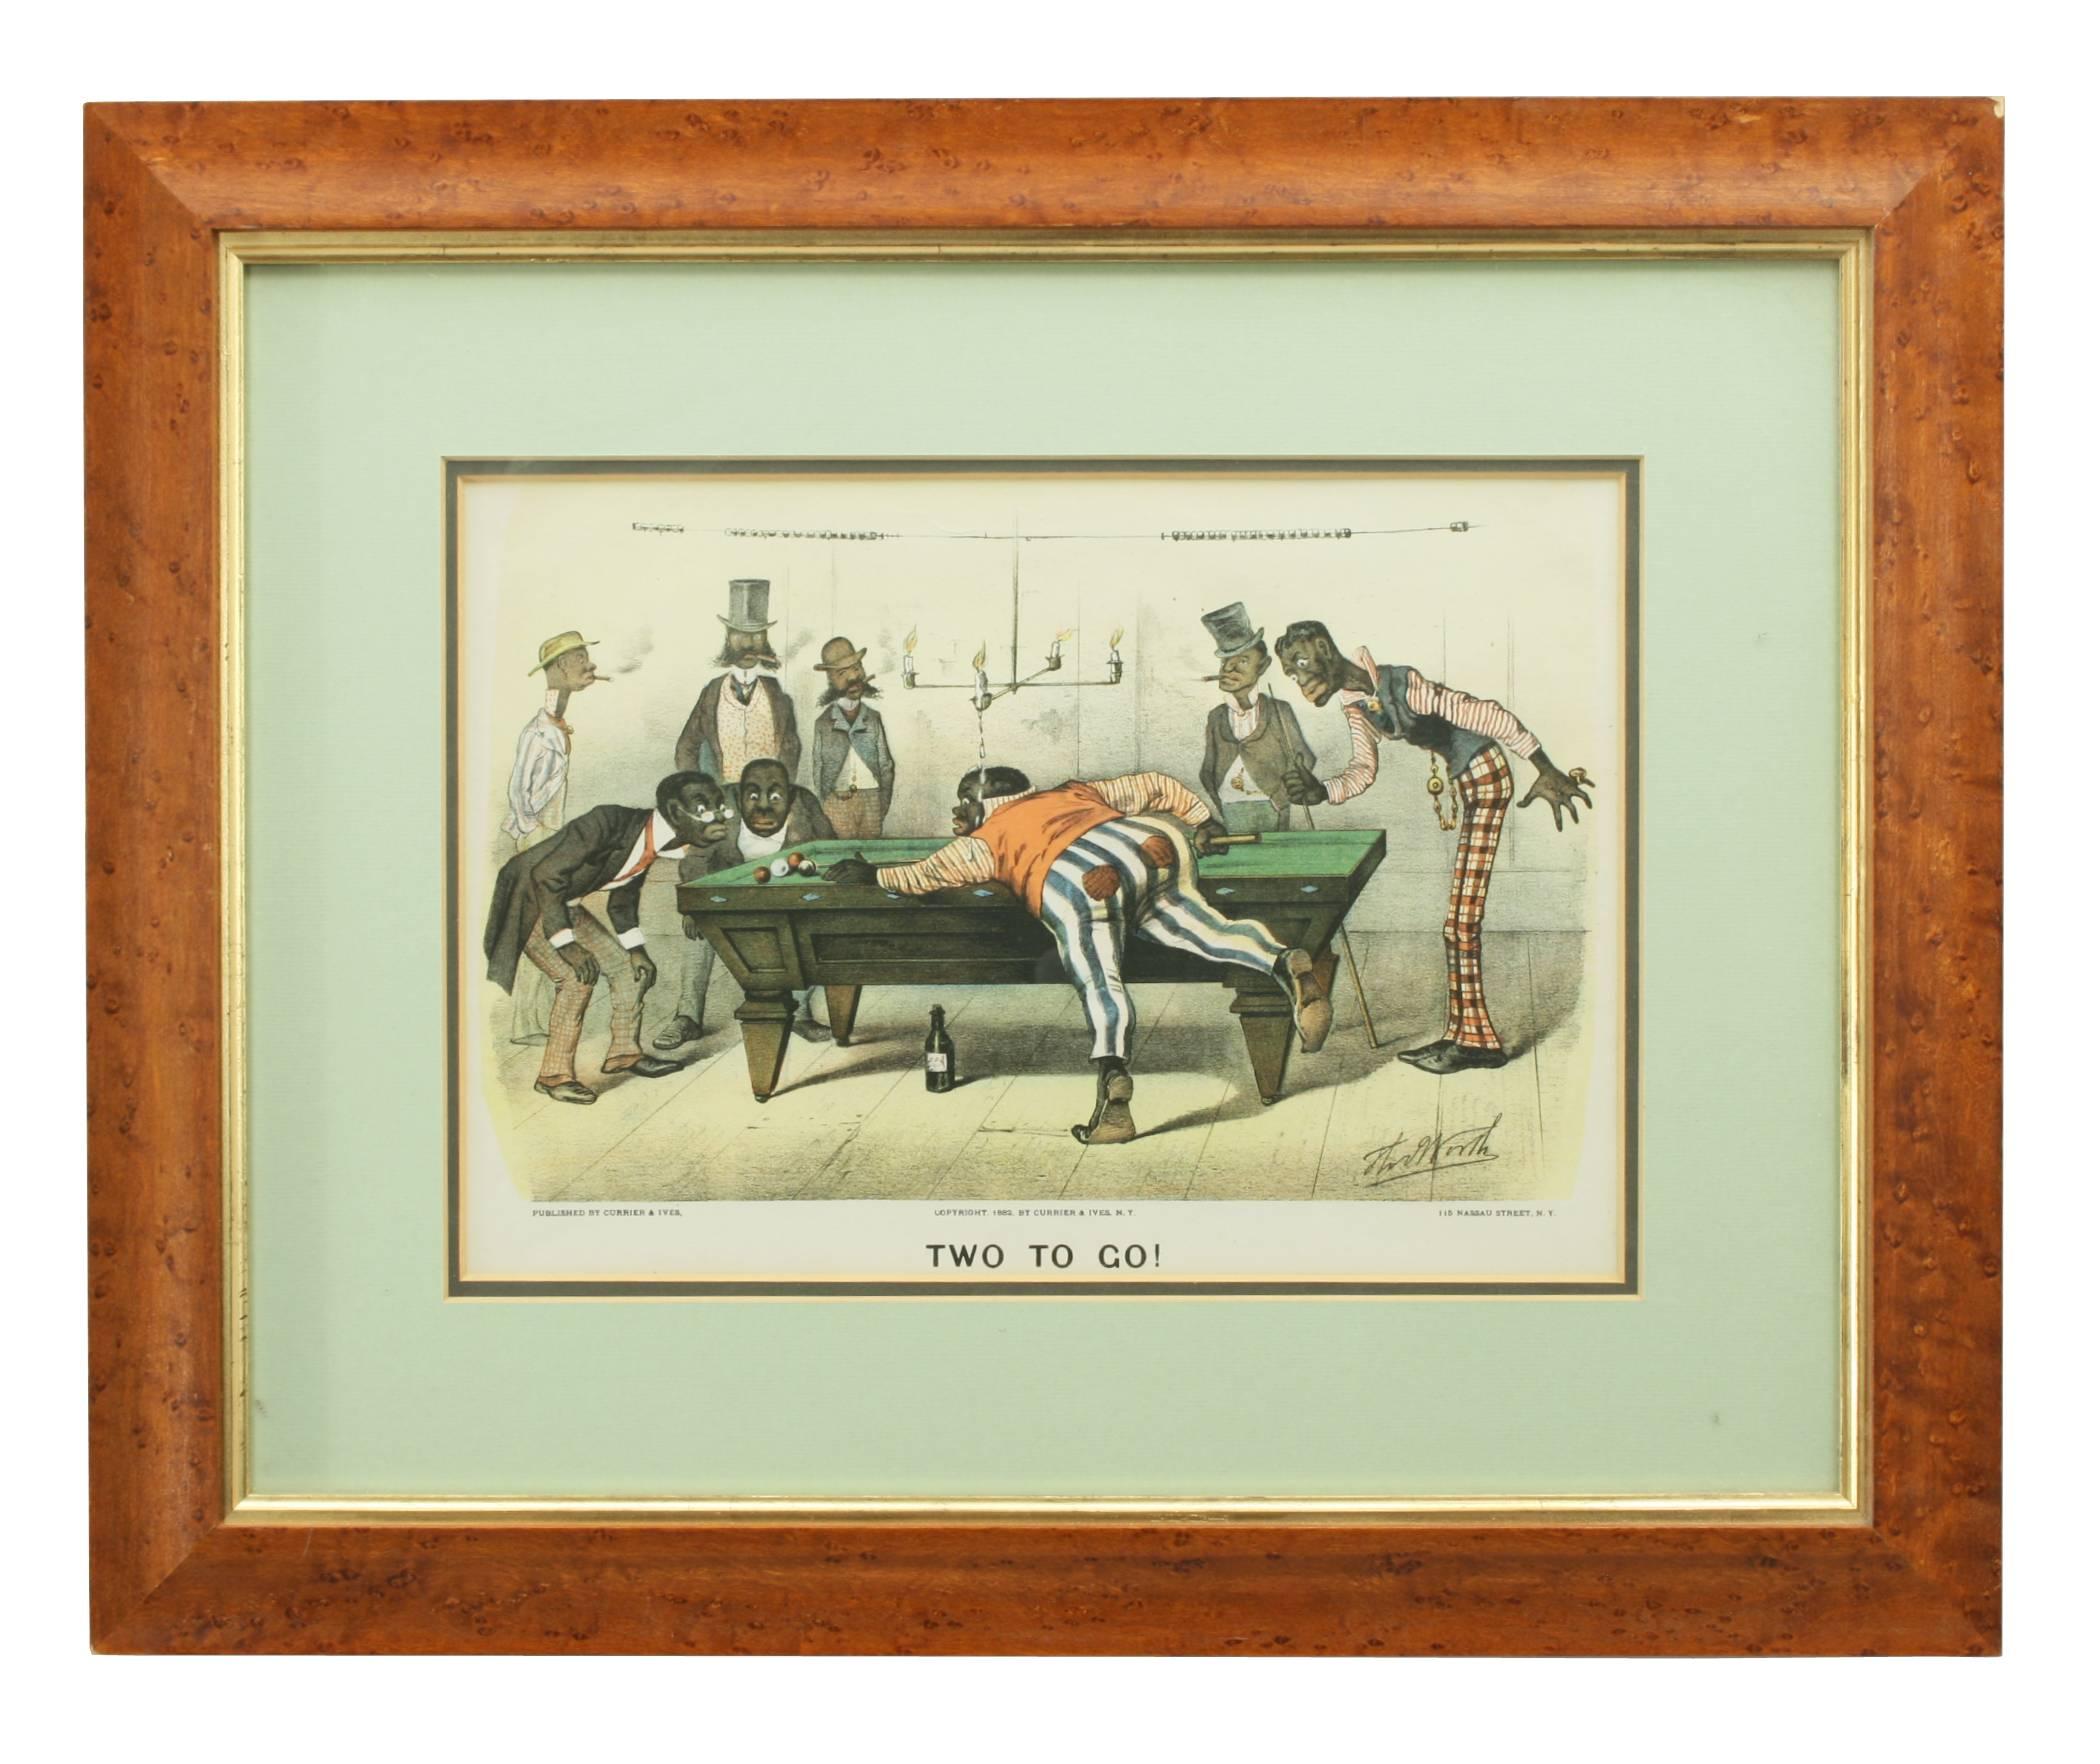 Currier & Ives 'Darktown Series' lithographs. 
A pair of original coloured billiard lithographs by Currier & Ives of America. Published in 1882 these cartoon characters came from the 'Darktown Series' of lithographs and reflected social attitudes